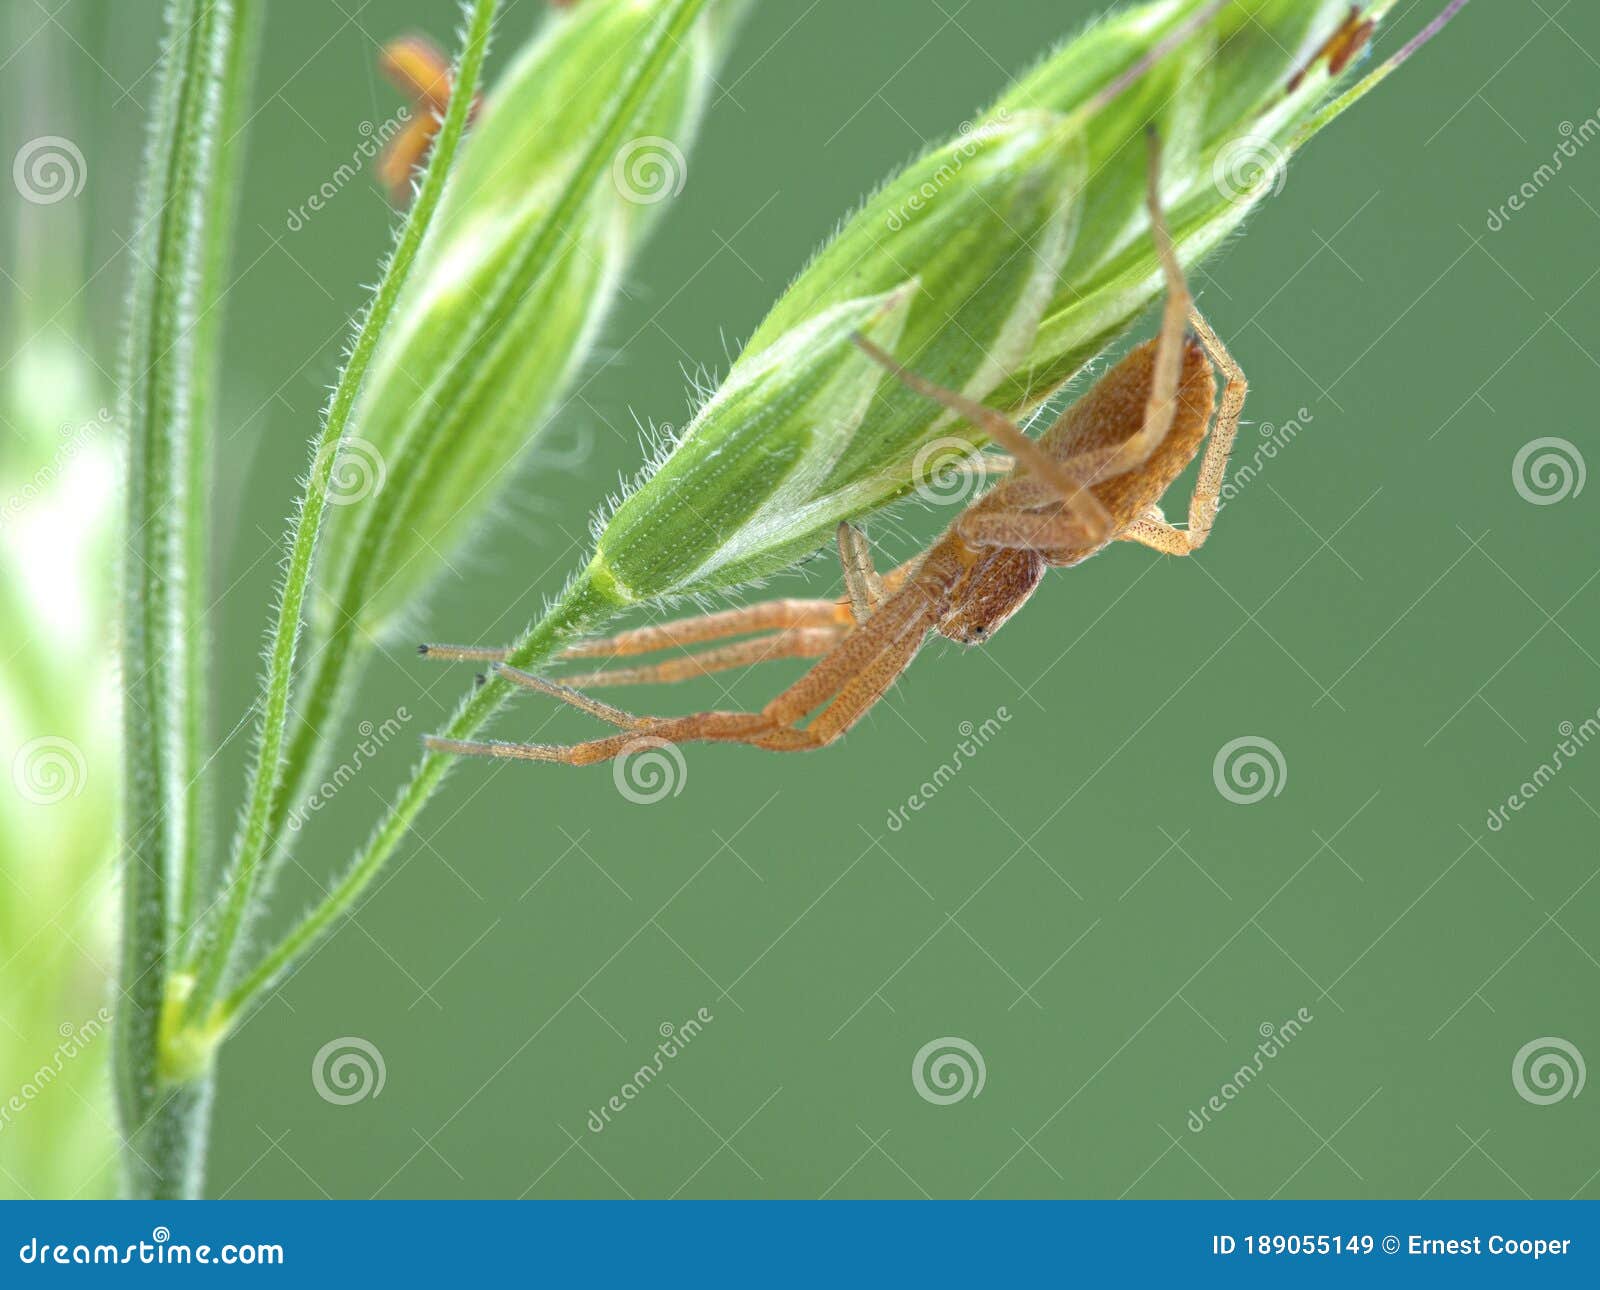 p1010003 pretty crab spider, philodromus rufus,resting on the seeds of a clump of grass cecp 2020